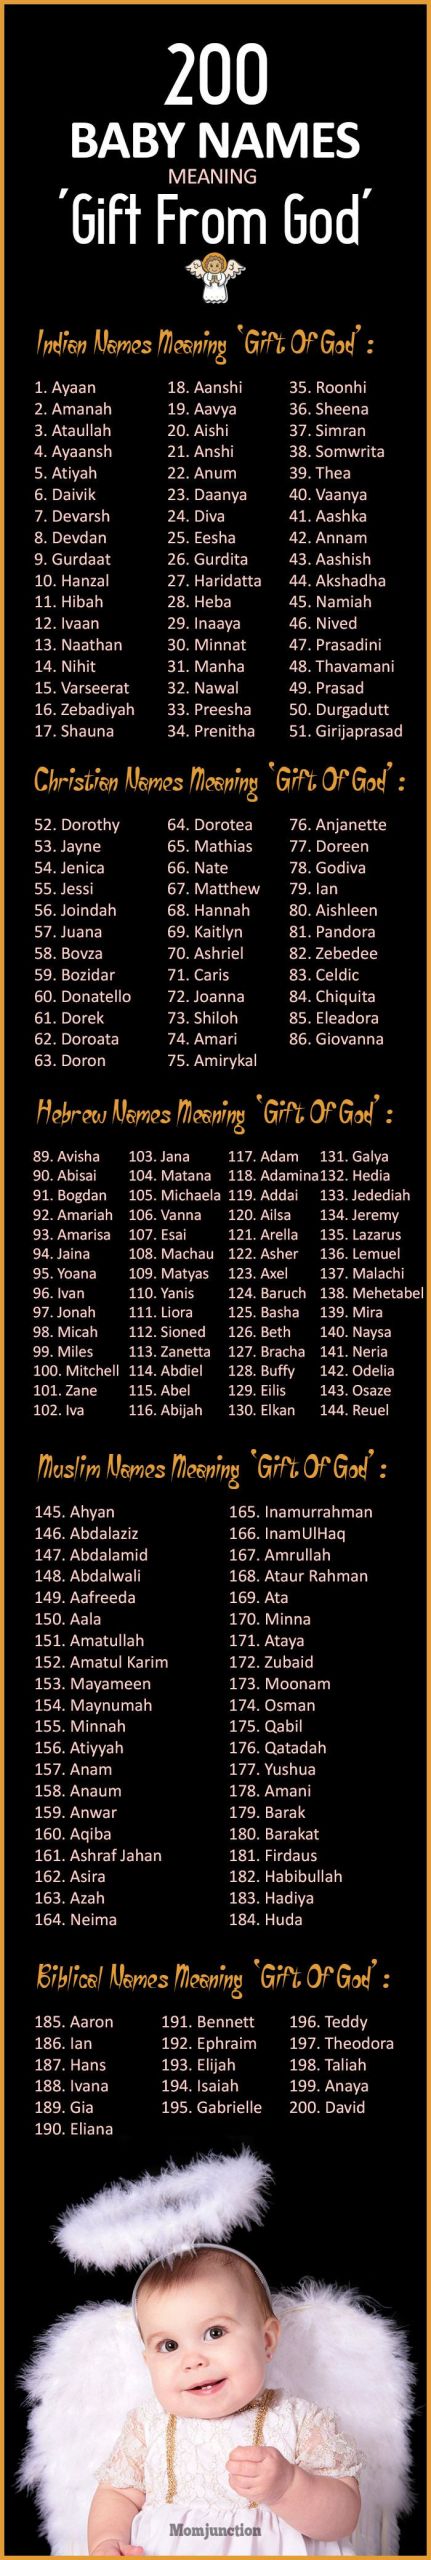 Baby Girl Names With Meaning Gift Of God
 Best 25 Cute names ideas on Pinterest